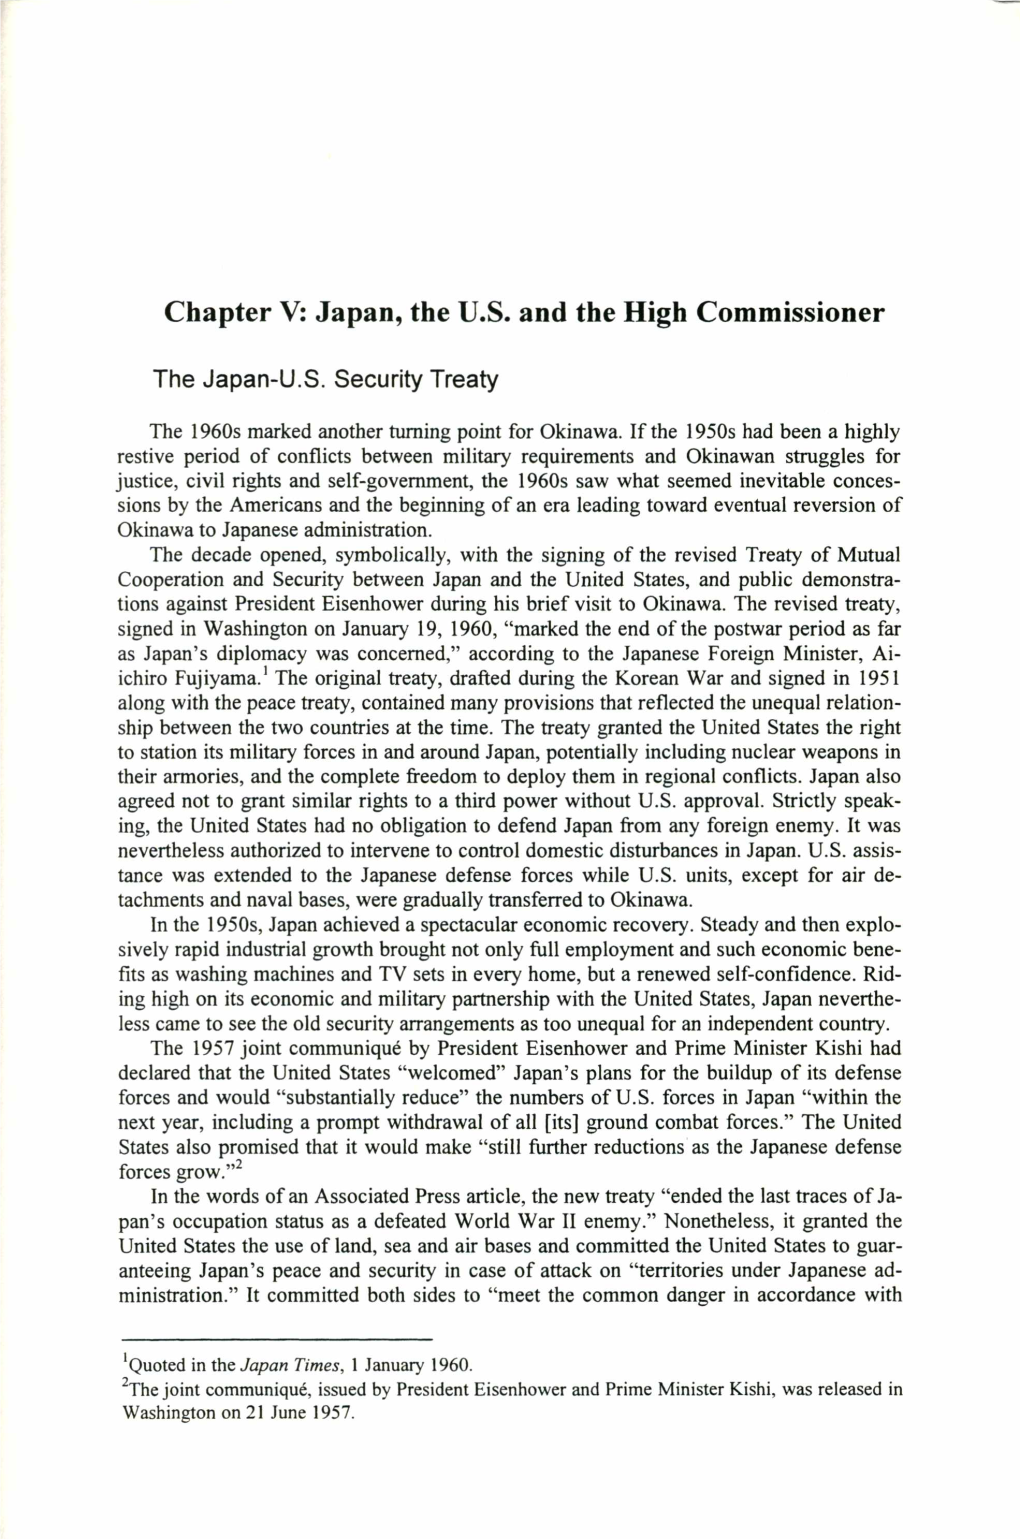 Japan, the US and the High Commissioner